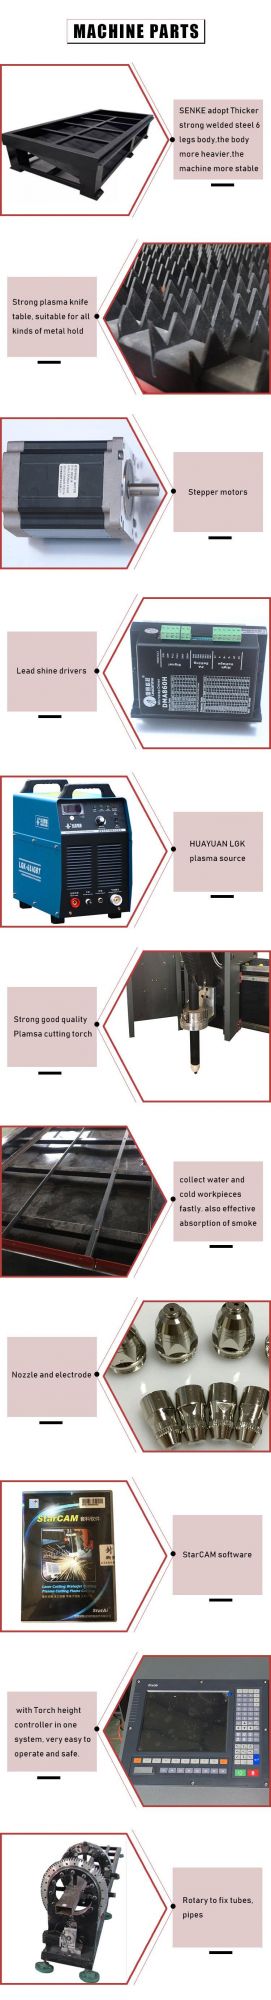 Stainless Steel 4 Axis Plasma Cutting Machines